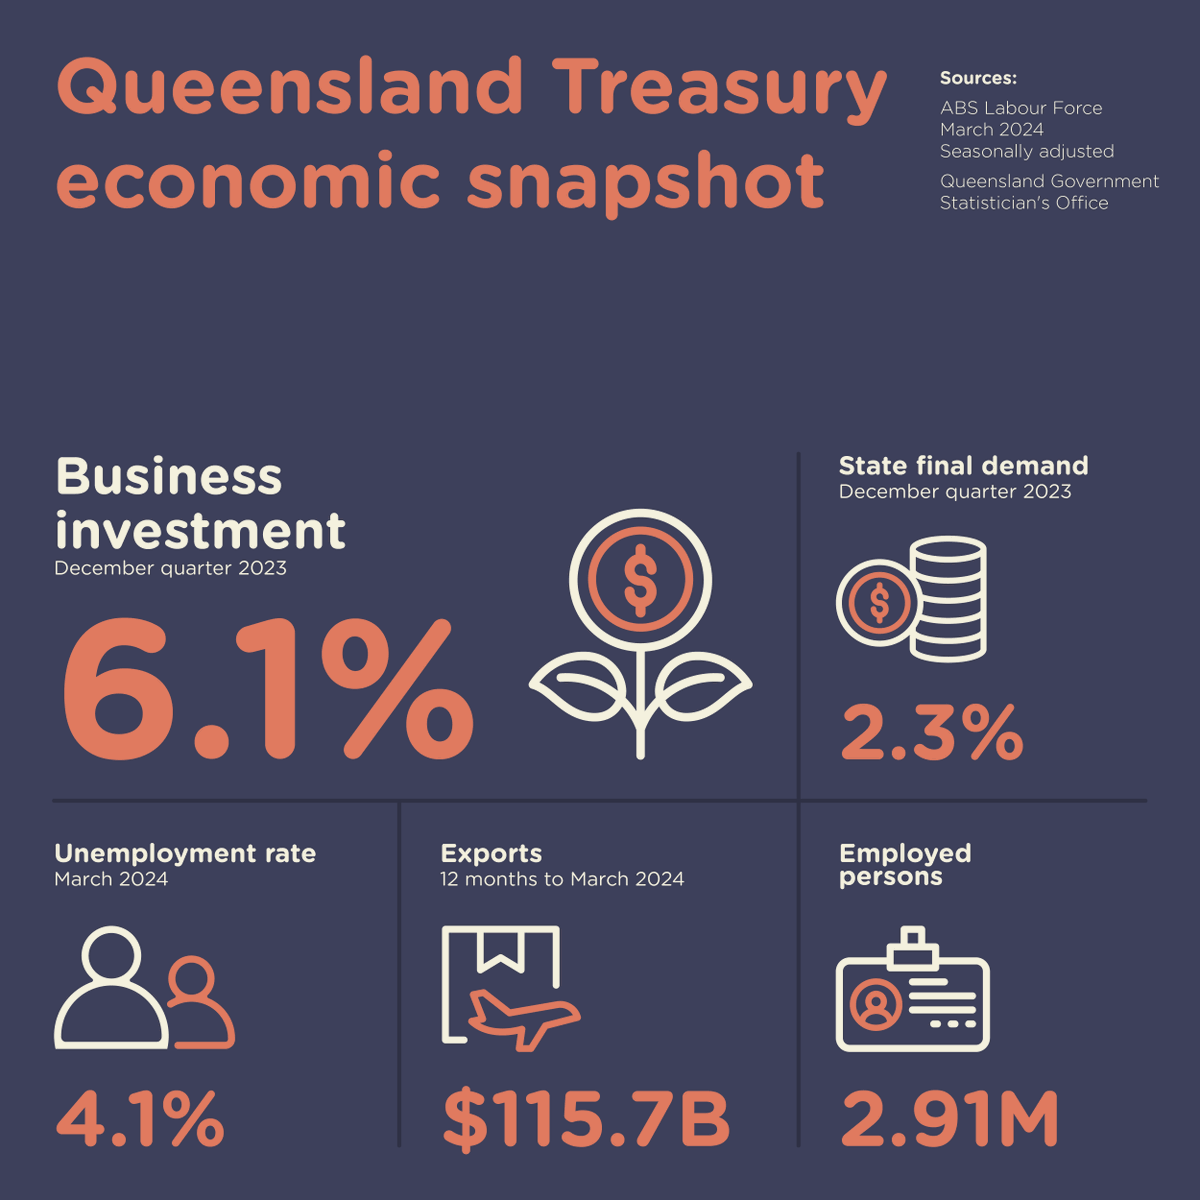 📊April Economic Snapshot. 1. Business investment: 6.1% (December quarter 2023) 2. State final demand: 2.3% (December quarter 2023) 3. Unemployment rate: 4.1% (March 2024) 4. Exports: $115.7bn (12 months to March 2024) 5. Employed persons: 2.91m qgso.qld.gov.au